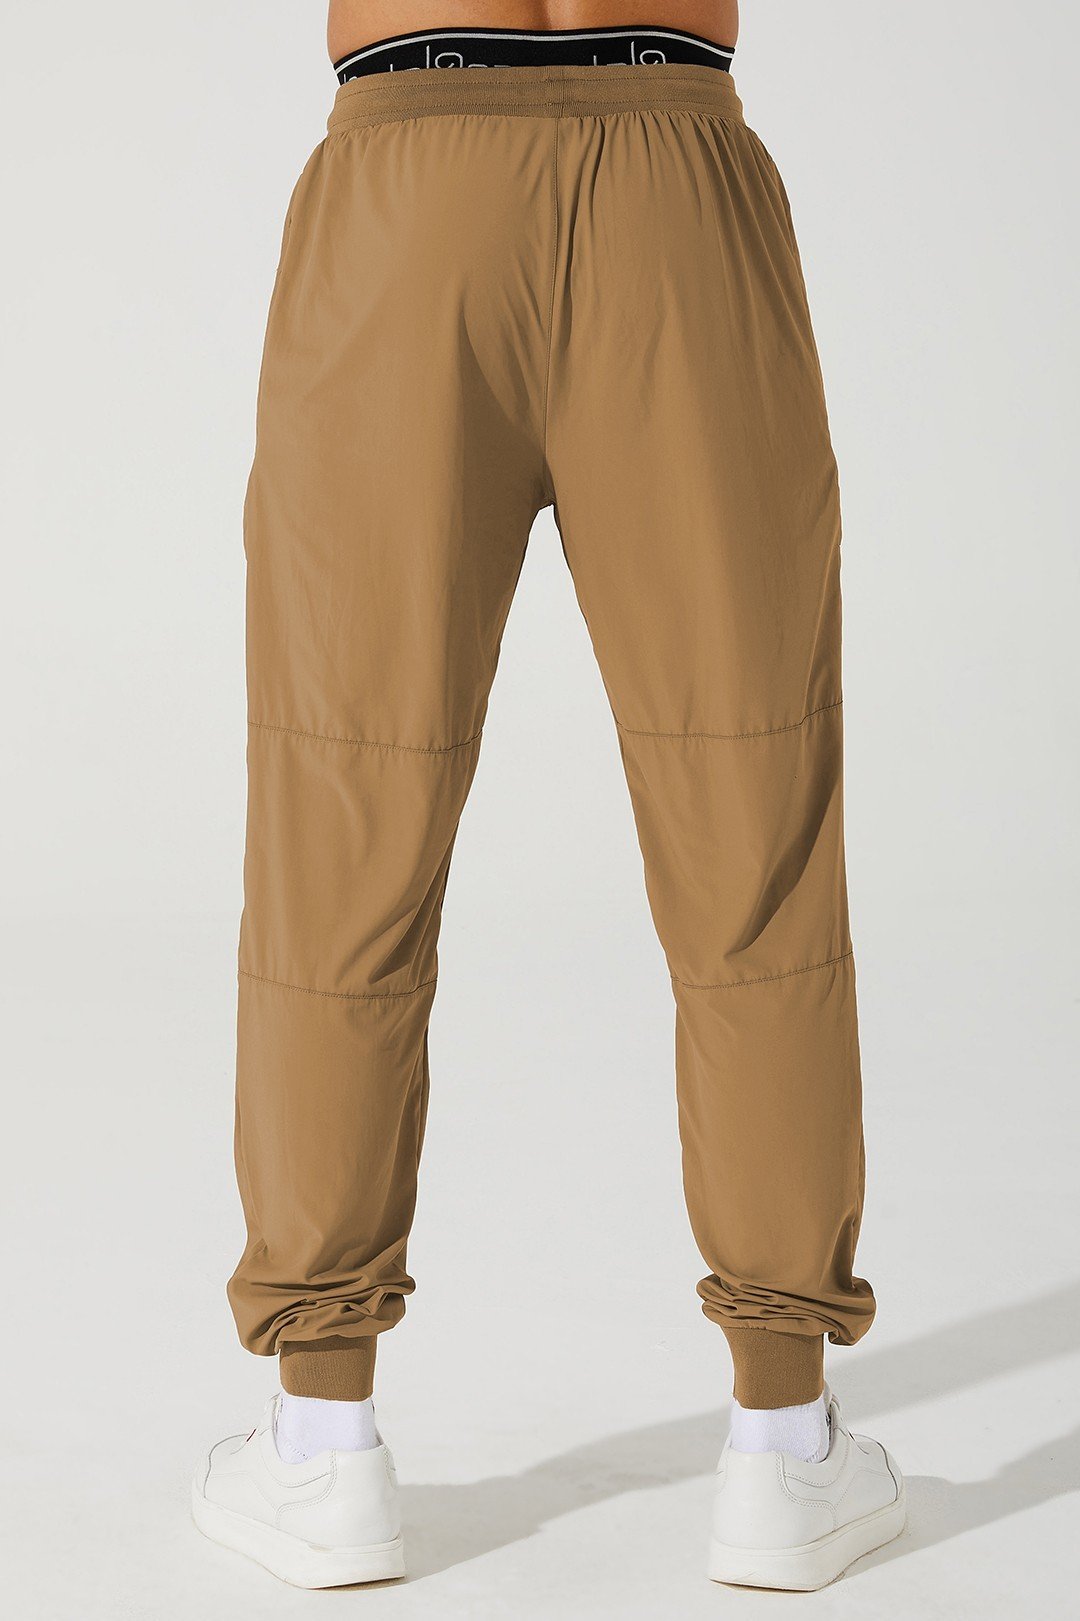 Men's cappuccino beige trousers with Travis Pant brand, style OW-0029-MTR-BG, shown in image 2.